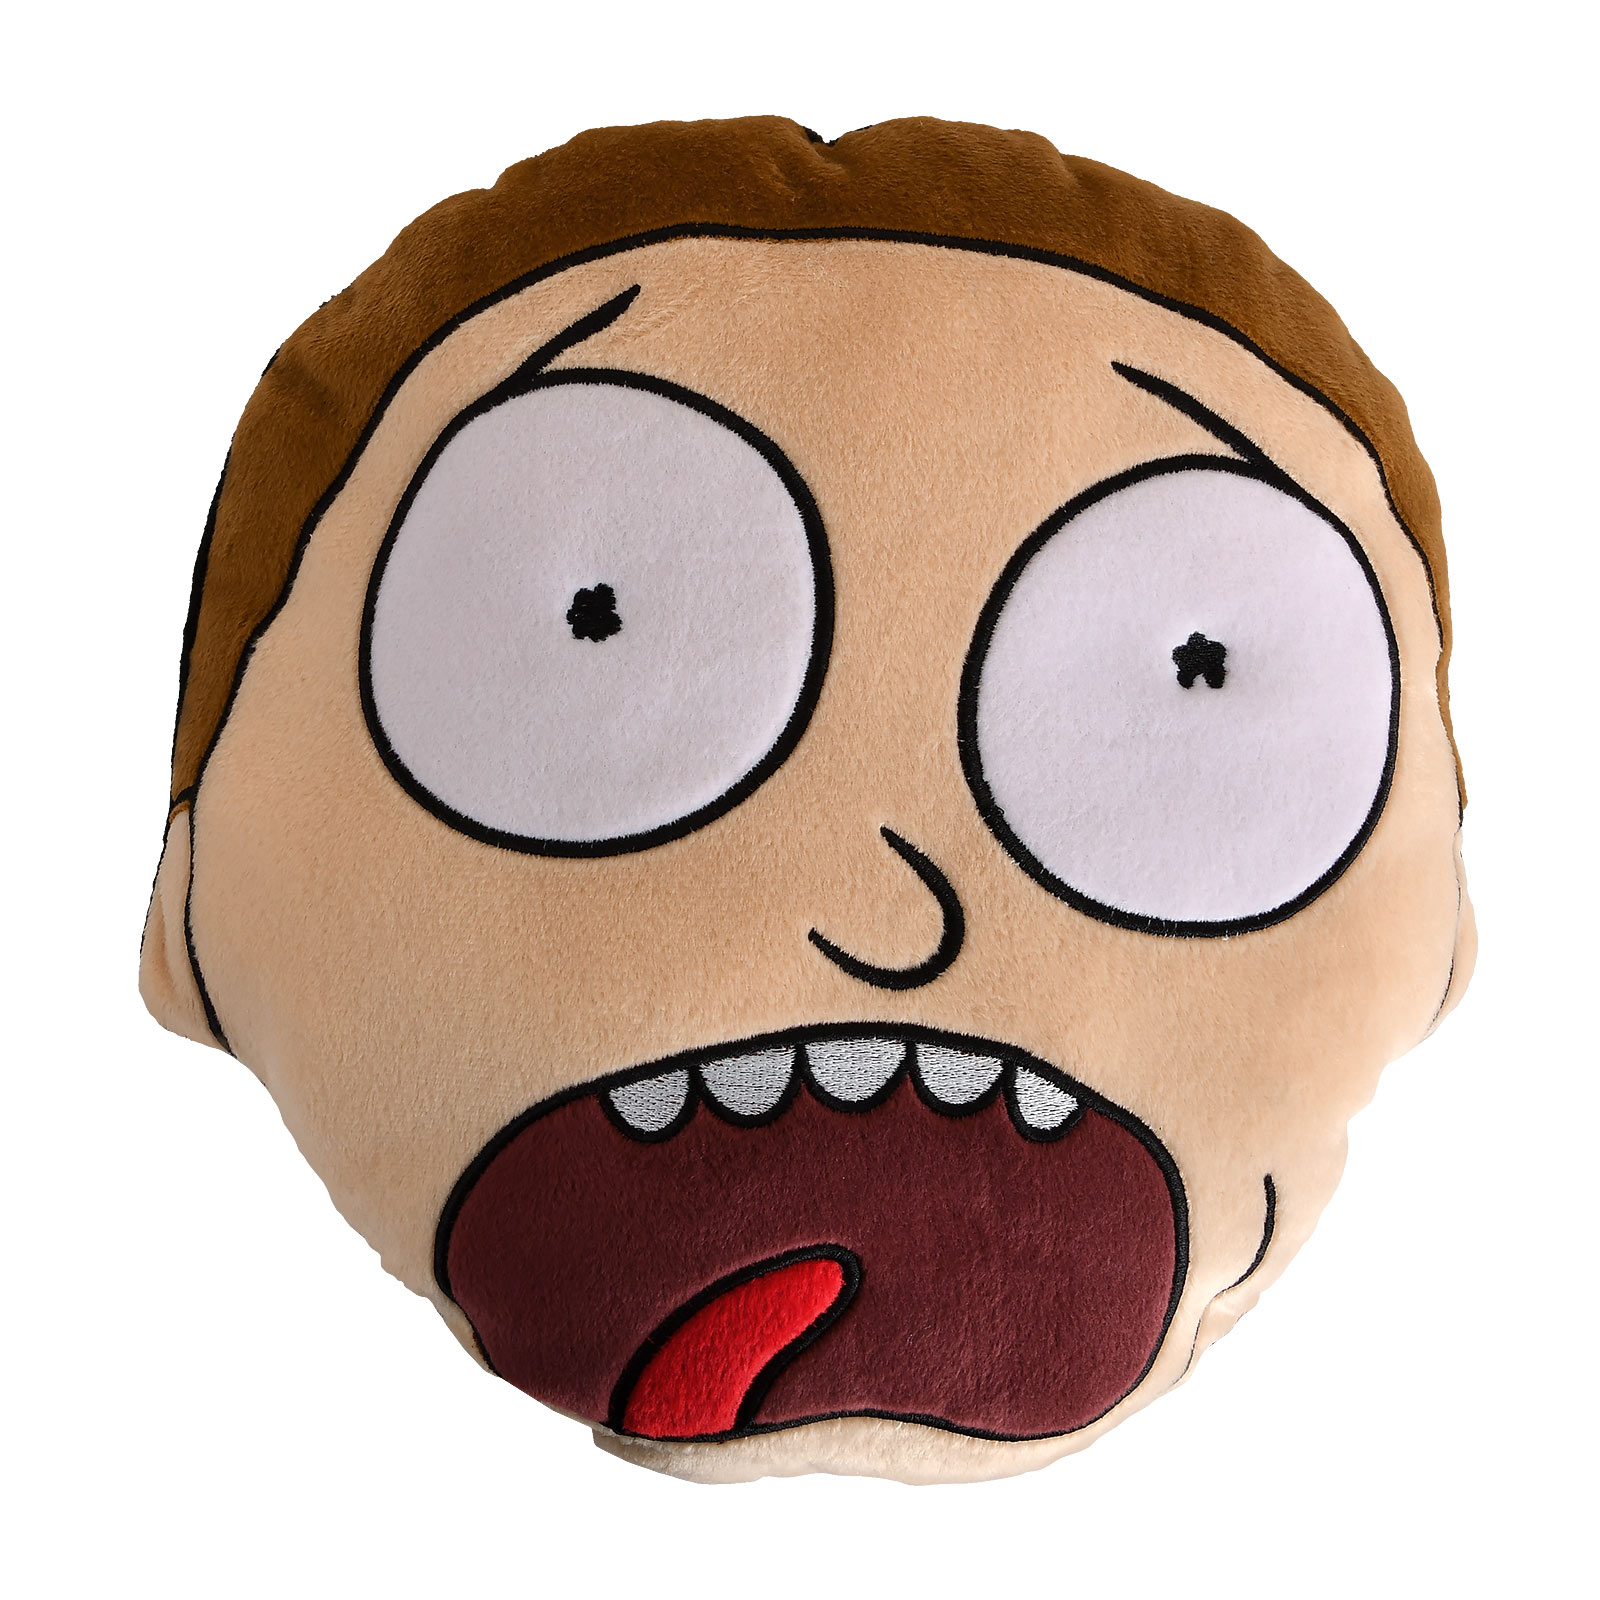 Rick and Morty - Morty Face Kissen